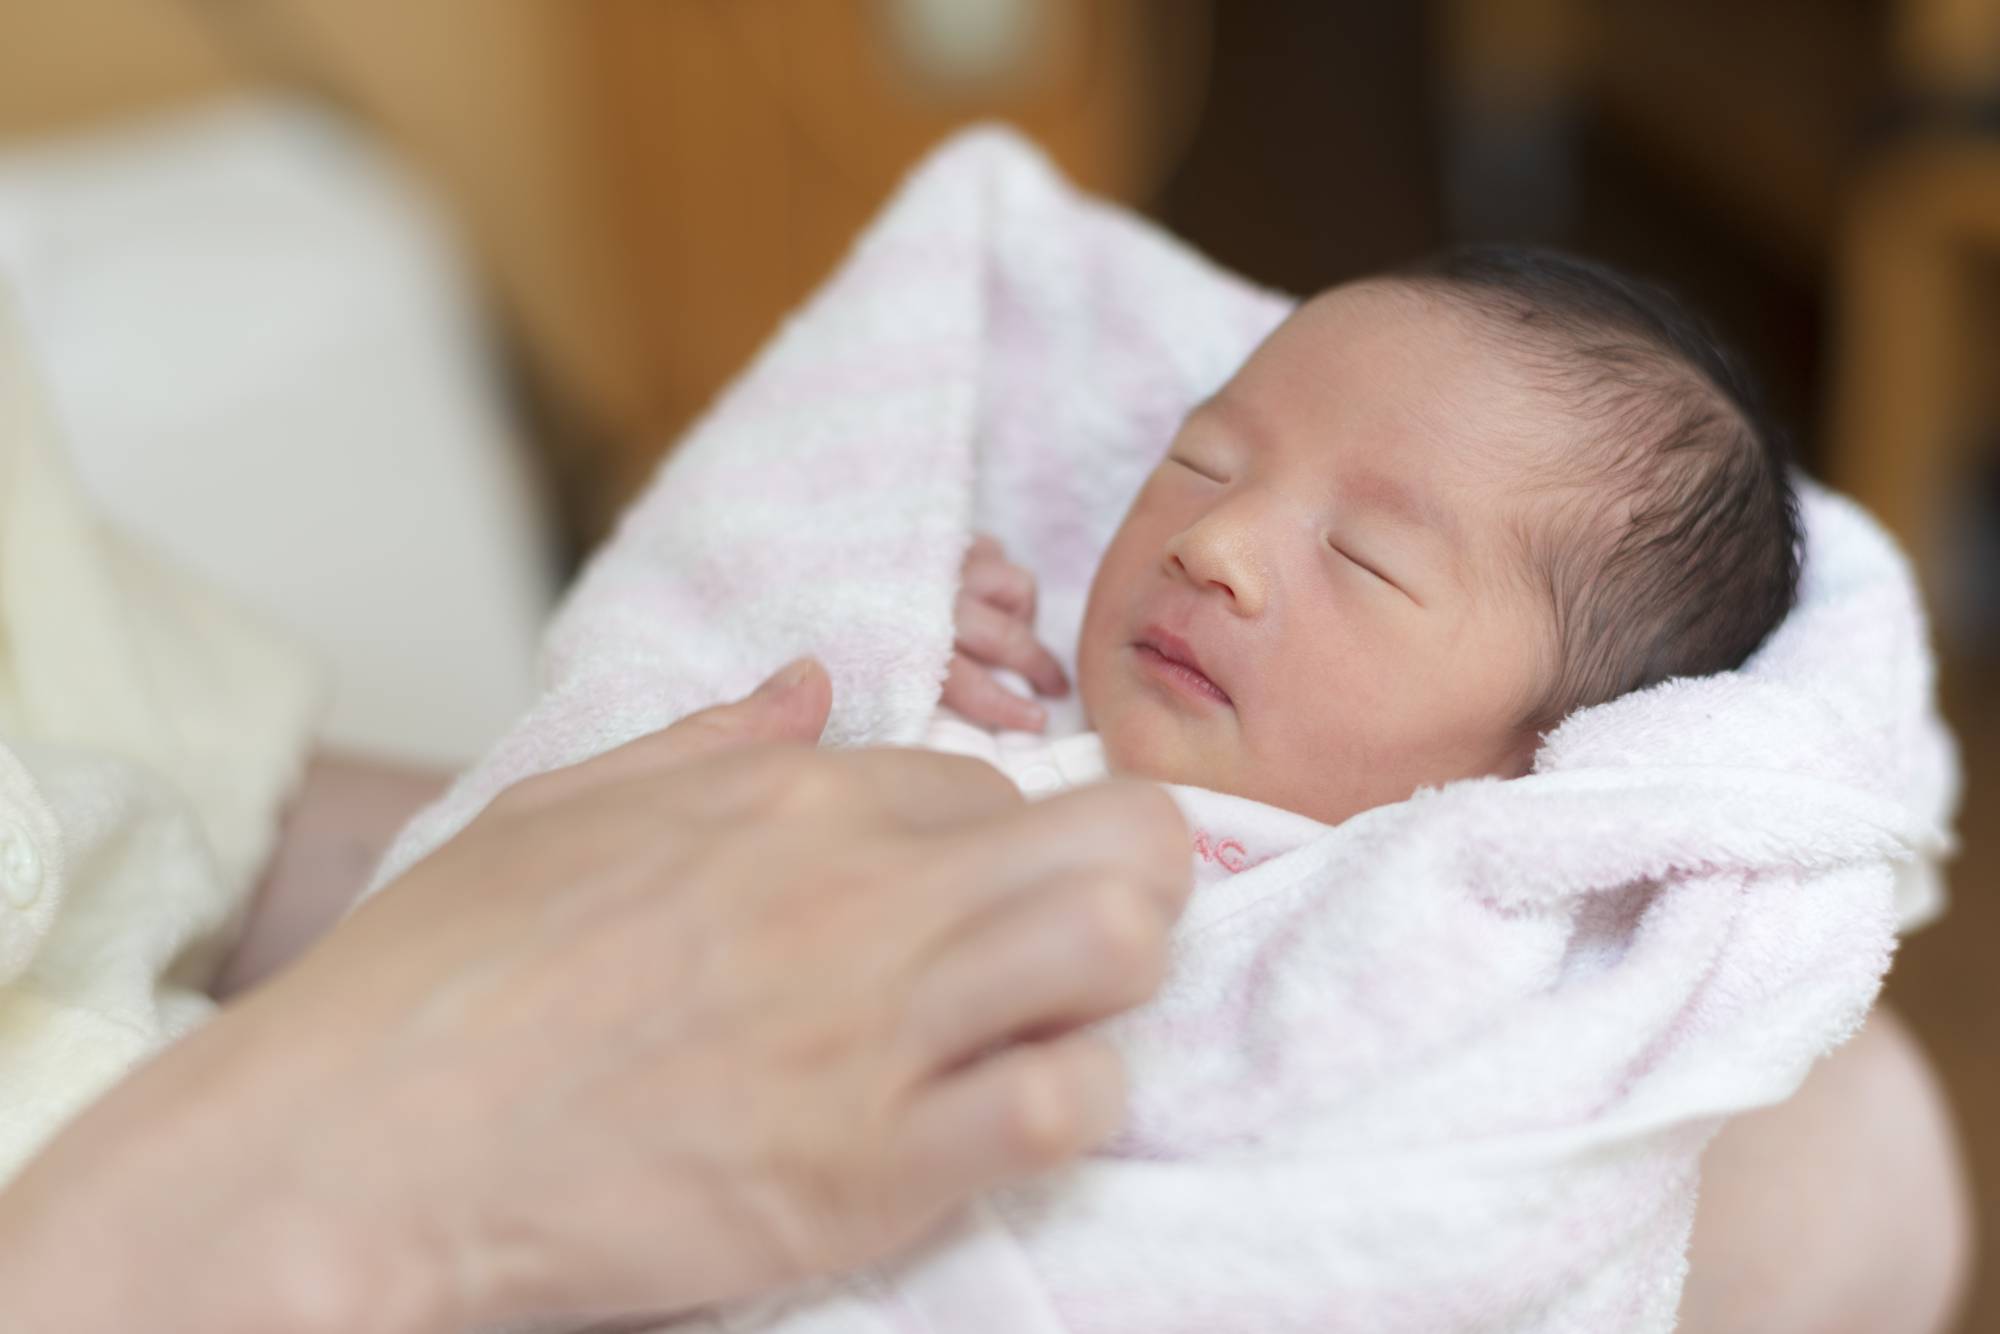 The government is considering raising the childbirth allowance to ¥500,000 per baby from April as costs for childbirth have been rising in Japan in recent years. | GETTY IMAGES